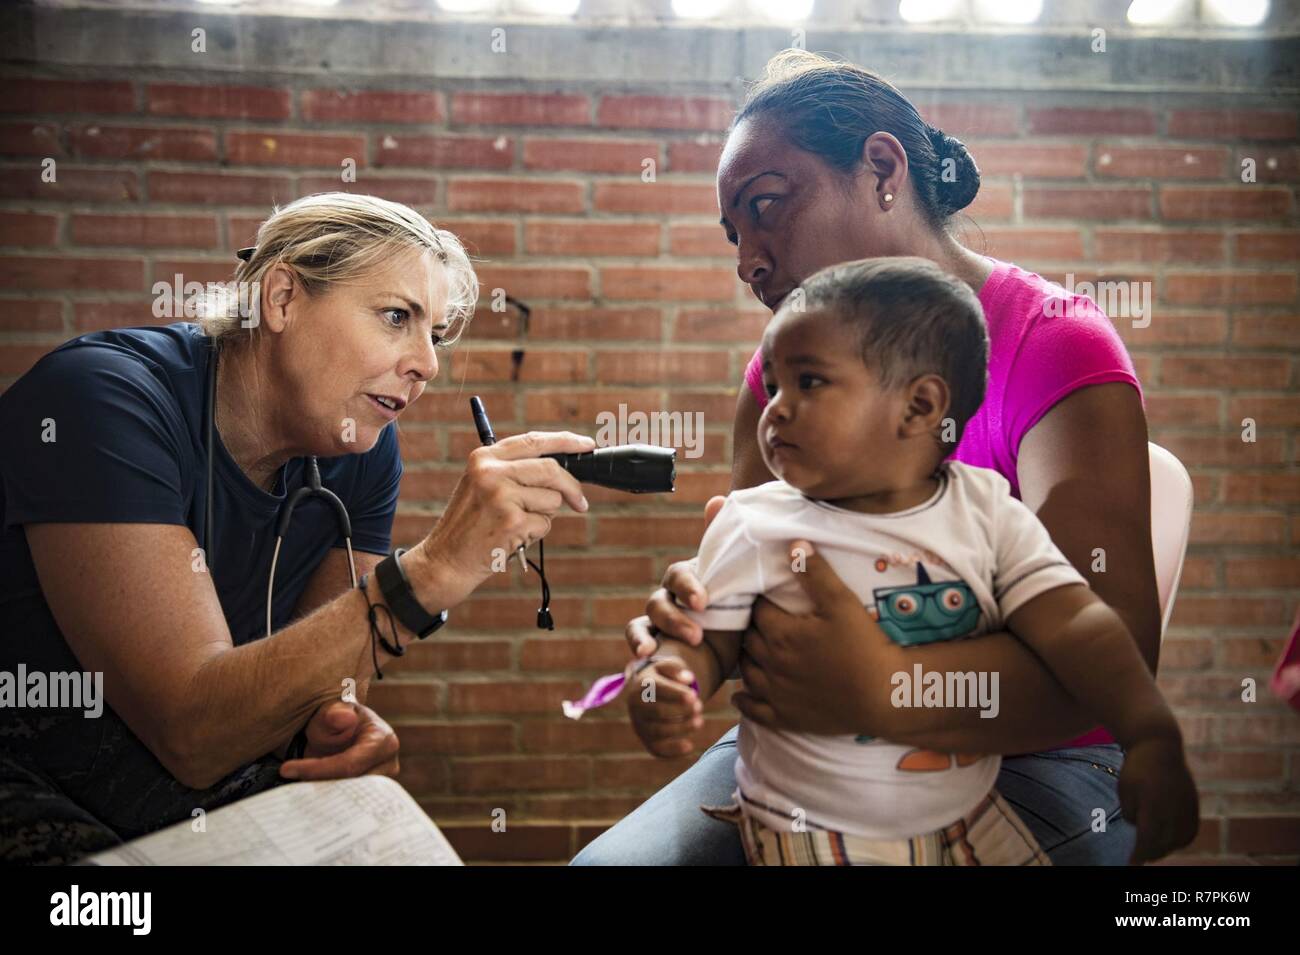 us navy cmdr ellen argo a native of alexandria va assigned to naval health clinic quantico va examines a child at the continuing promise 2017 cp 17 medical site in mayapo colombia march 22 2017 cp 17 is a us southern command sponsored and us naval forces southern commandus 4th fleet conducted deployment to conduct civil military operations including humanitarian assistance training engagements medical dental and veterinary support in an effort to show us support and commitment to central and south america R7PK6W